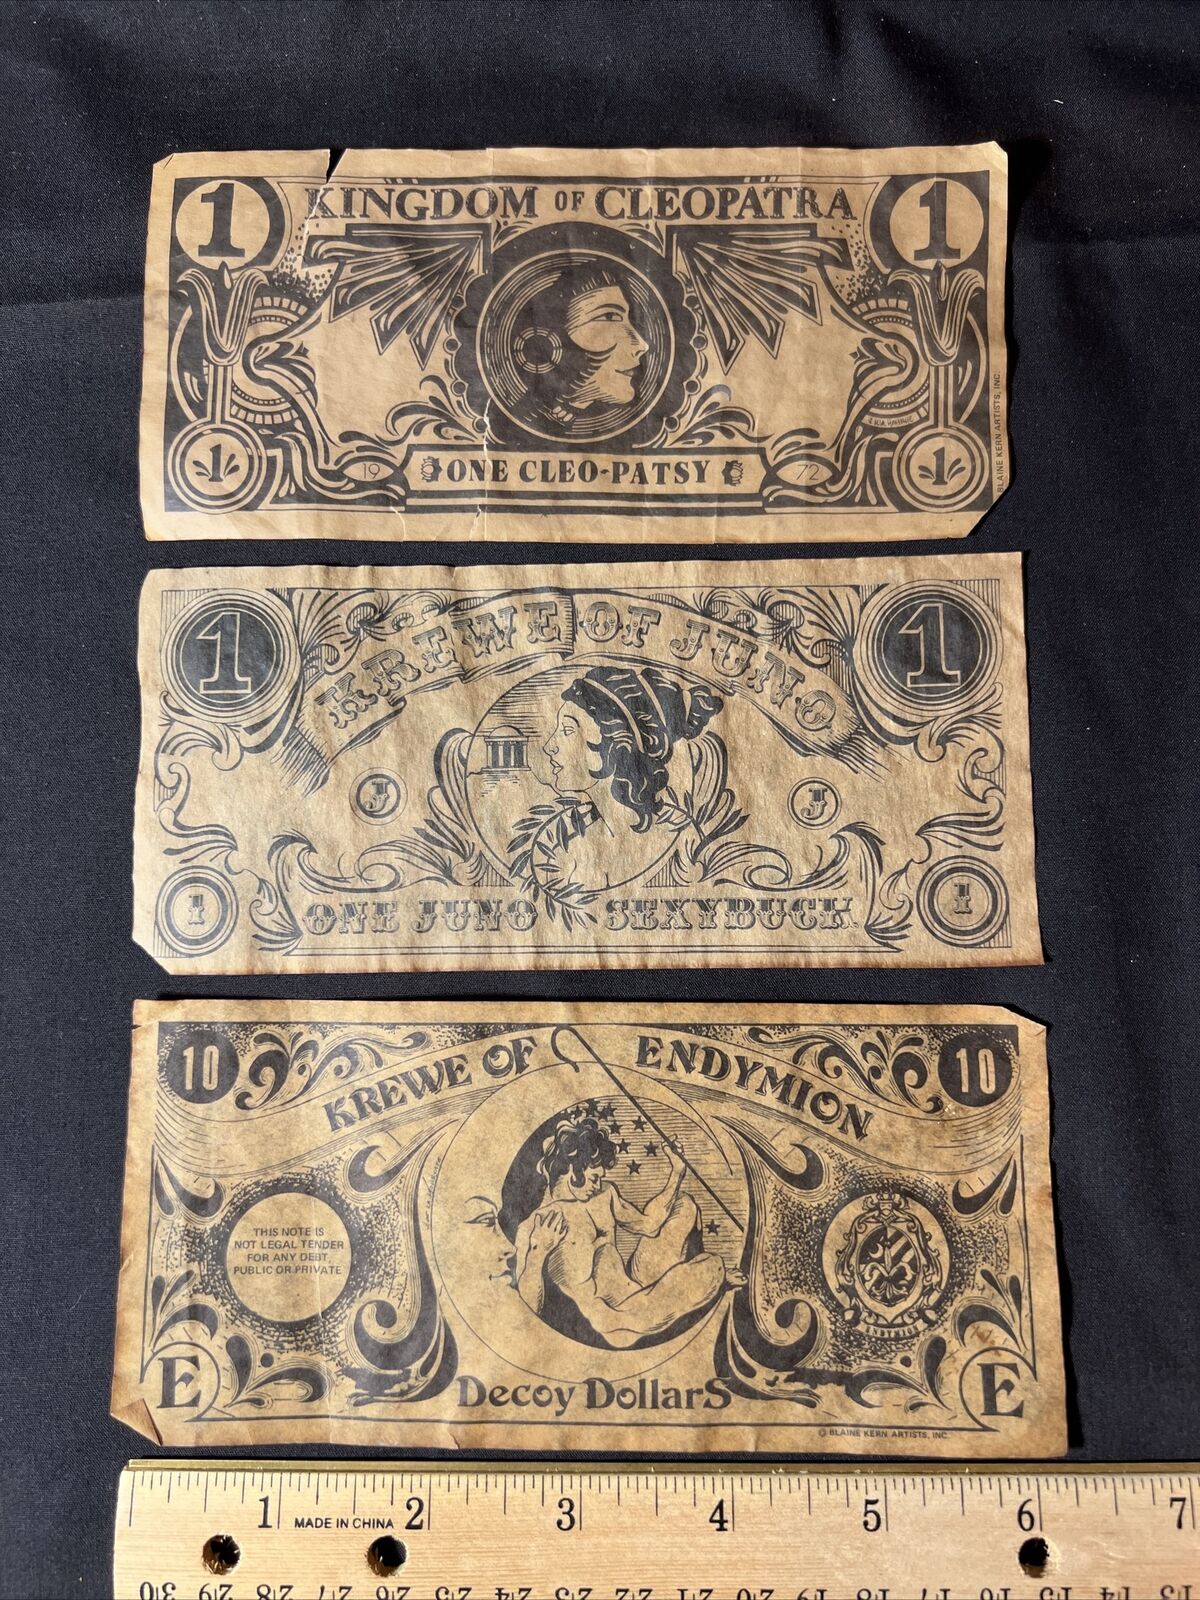 1974 75 & 76 PAPER MONEY FROM 3 KREWES NEW ORLEANS MARDI GRAS CARNIVAL FAVOR?